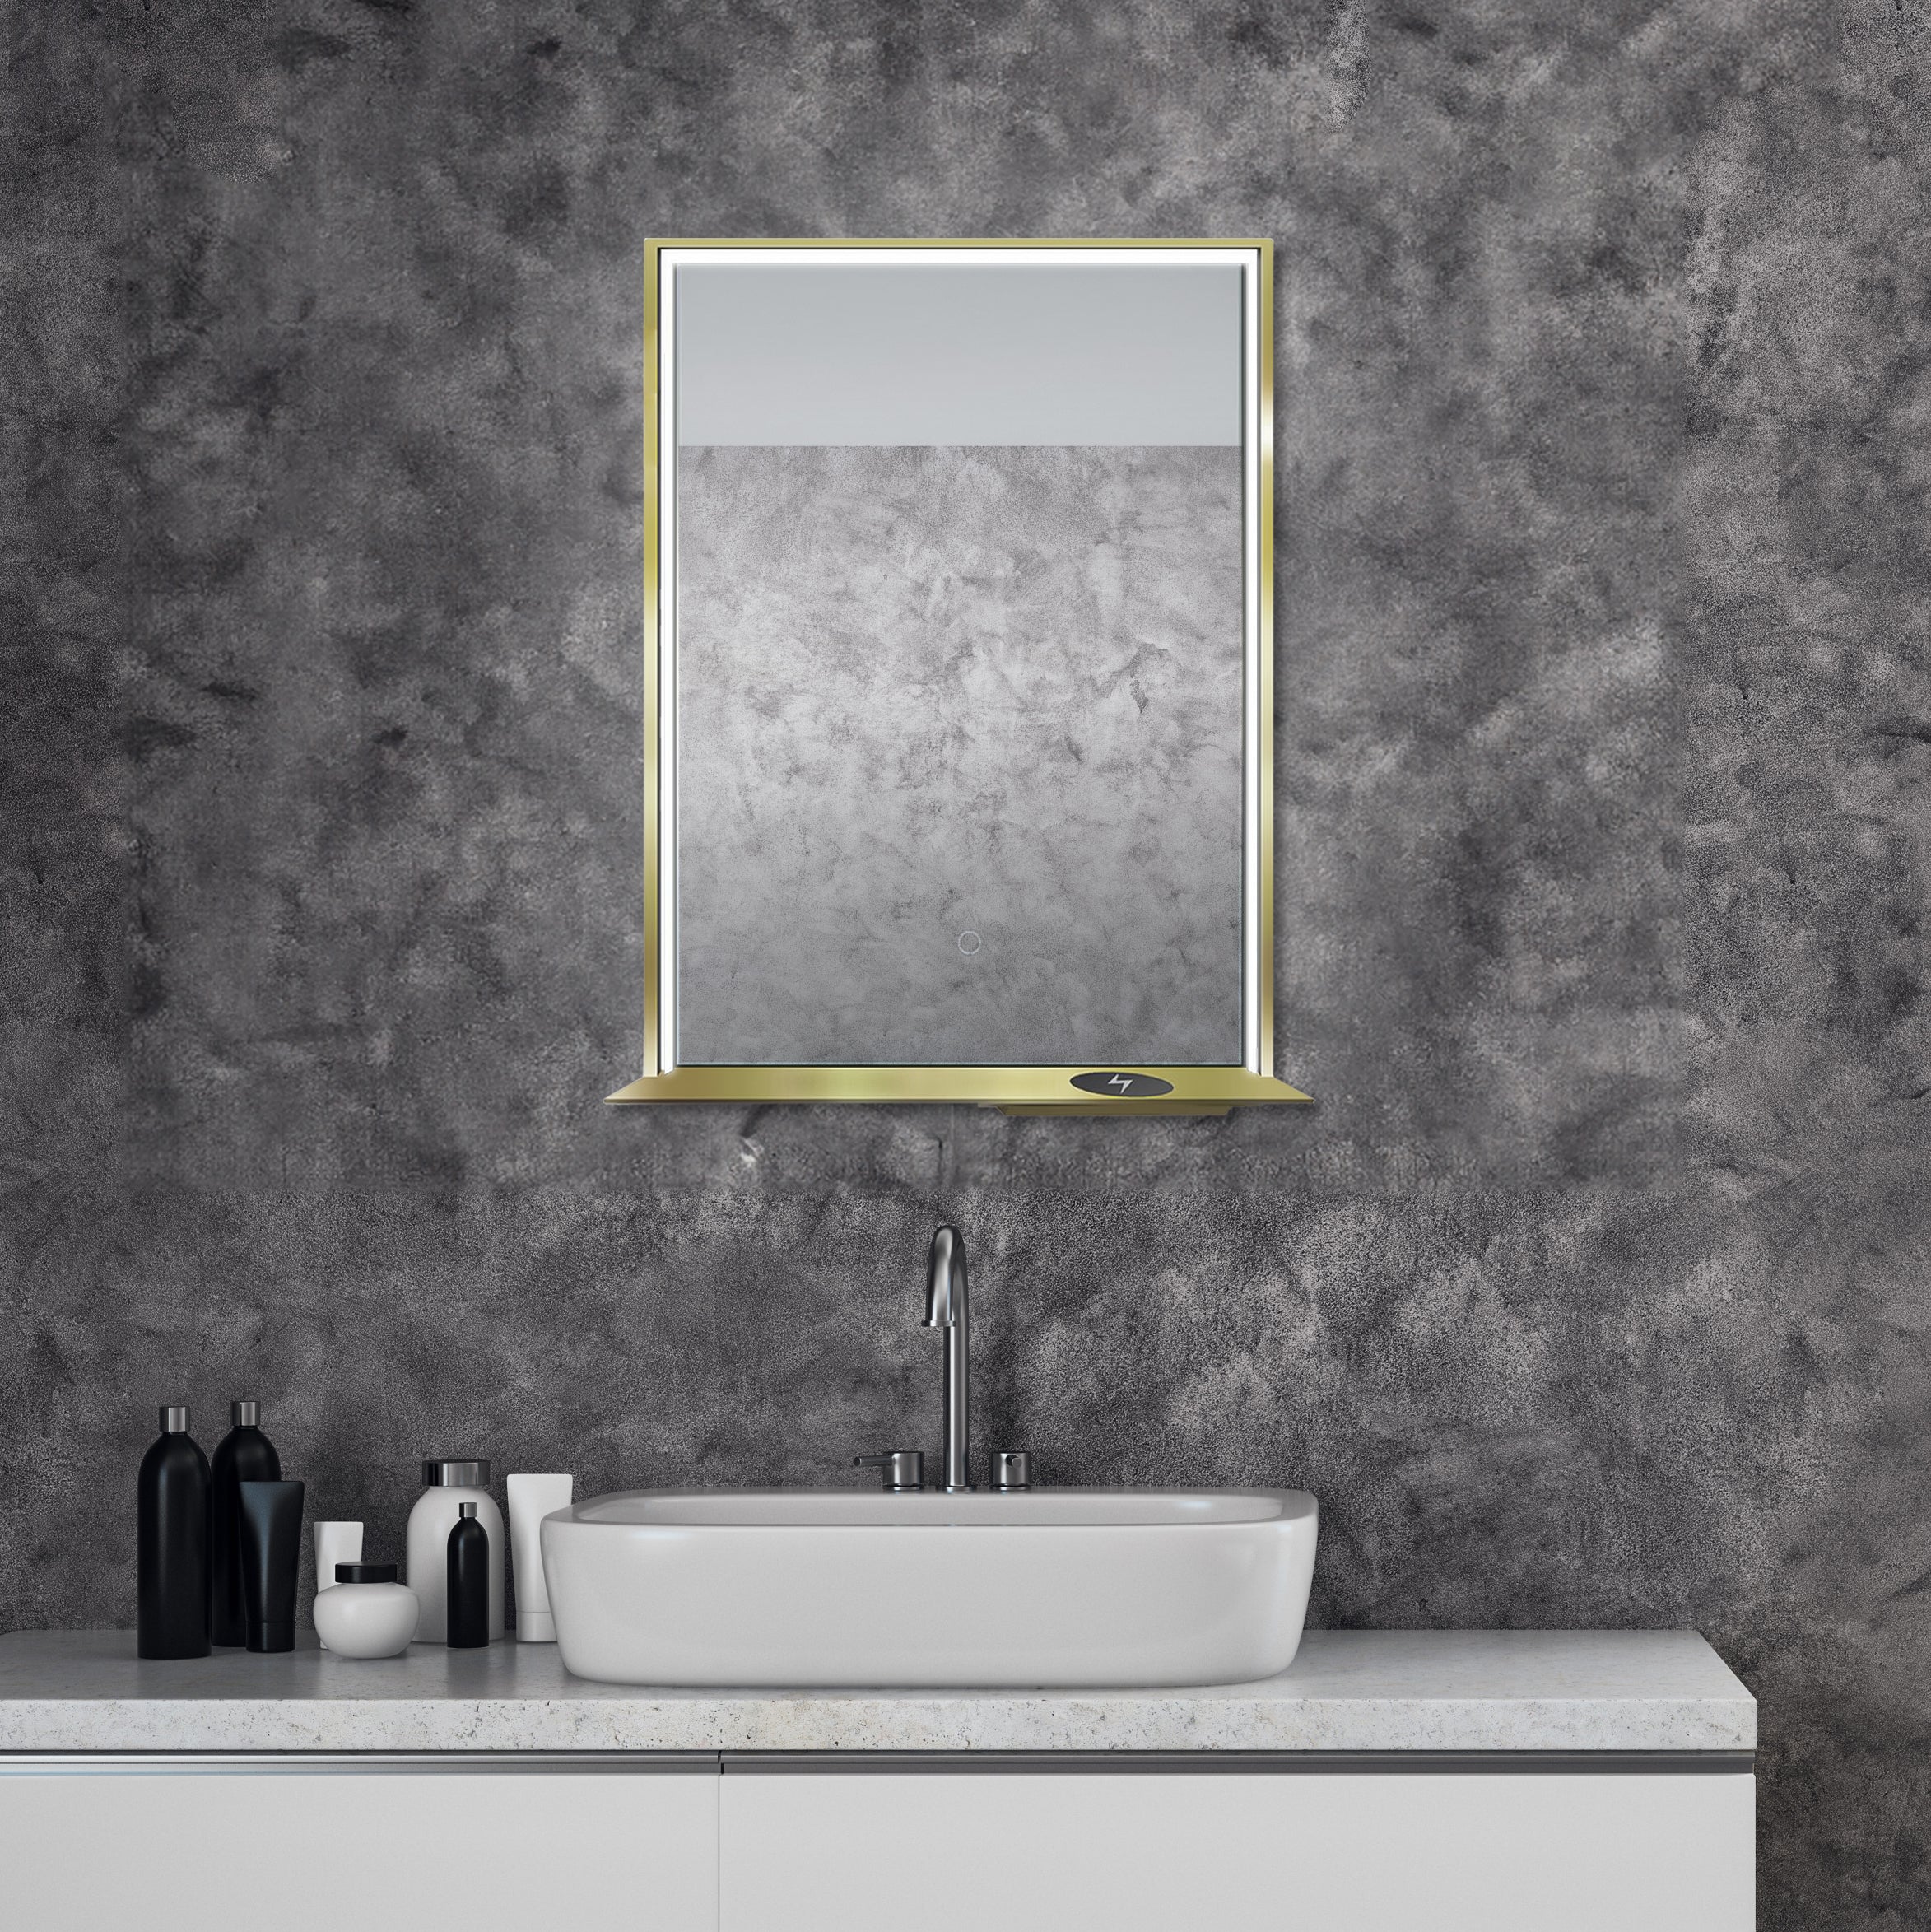 The Allegra 24" W x 32" H Framed LED Mirror with Bluetooth Speaker and Wireless Cell Phone Charger; Available in 3 colors